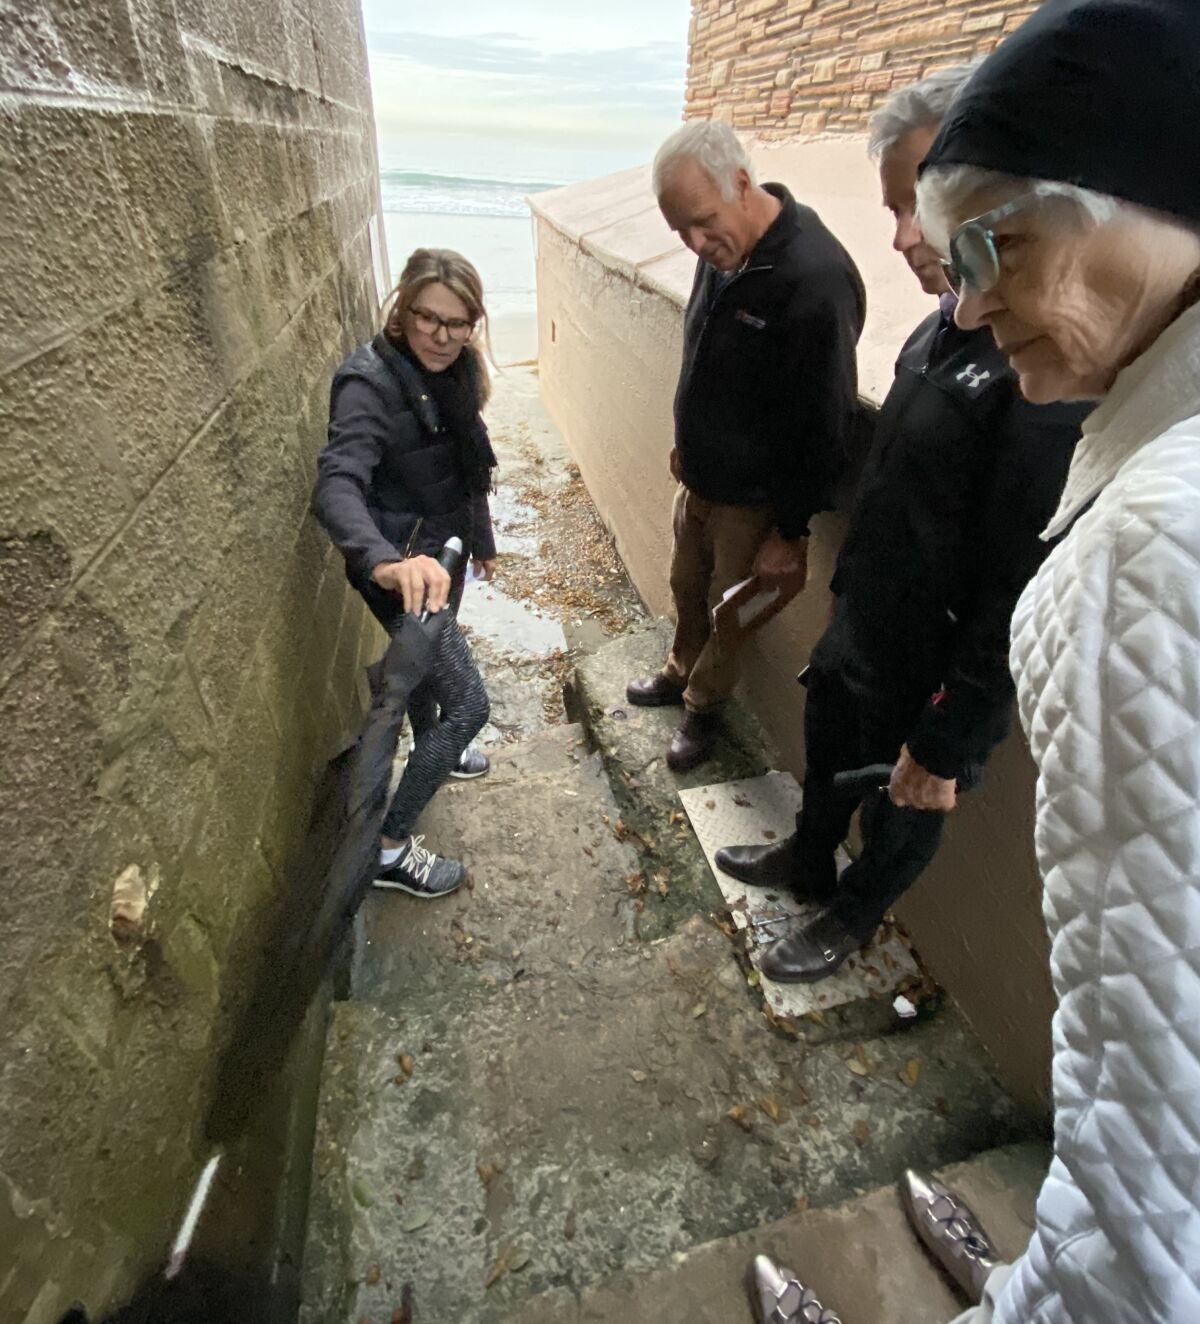 La Jolla resident Jill Peters points with her umbrella at the location for a railing proposed by Members of Friends of the Spindrift Drive Beach Access, a citizens group that also includes Tom Grunow, Patrick Ahern and Dori McCue.